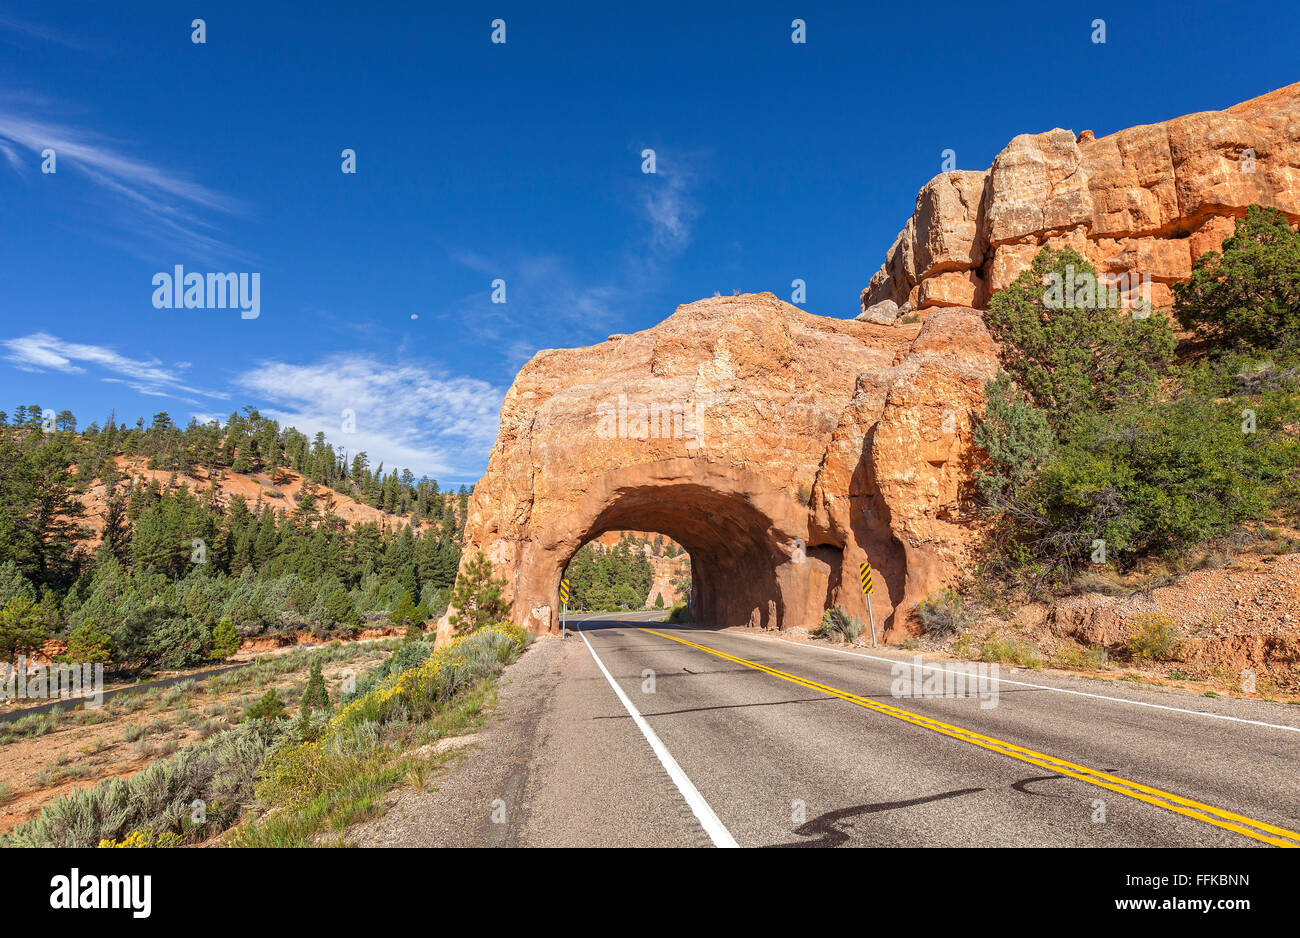 Arch road tunnel on the way to Bryce Canyon National Park, Utah, USA. Stock Photo